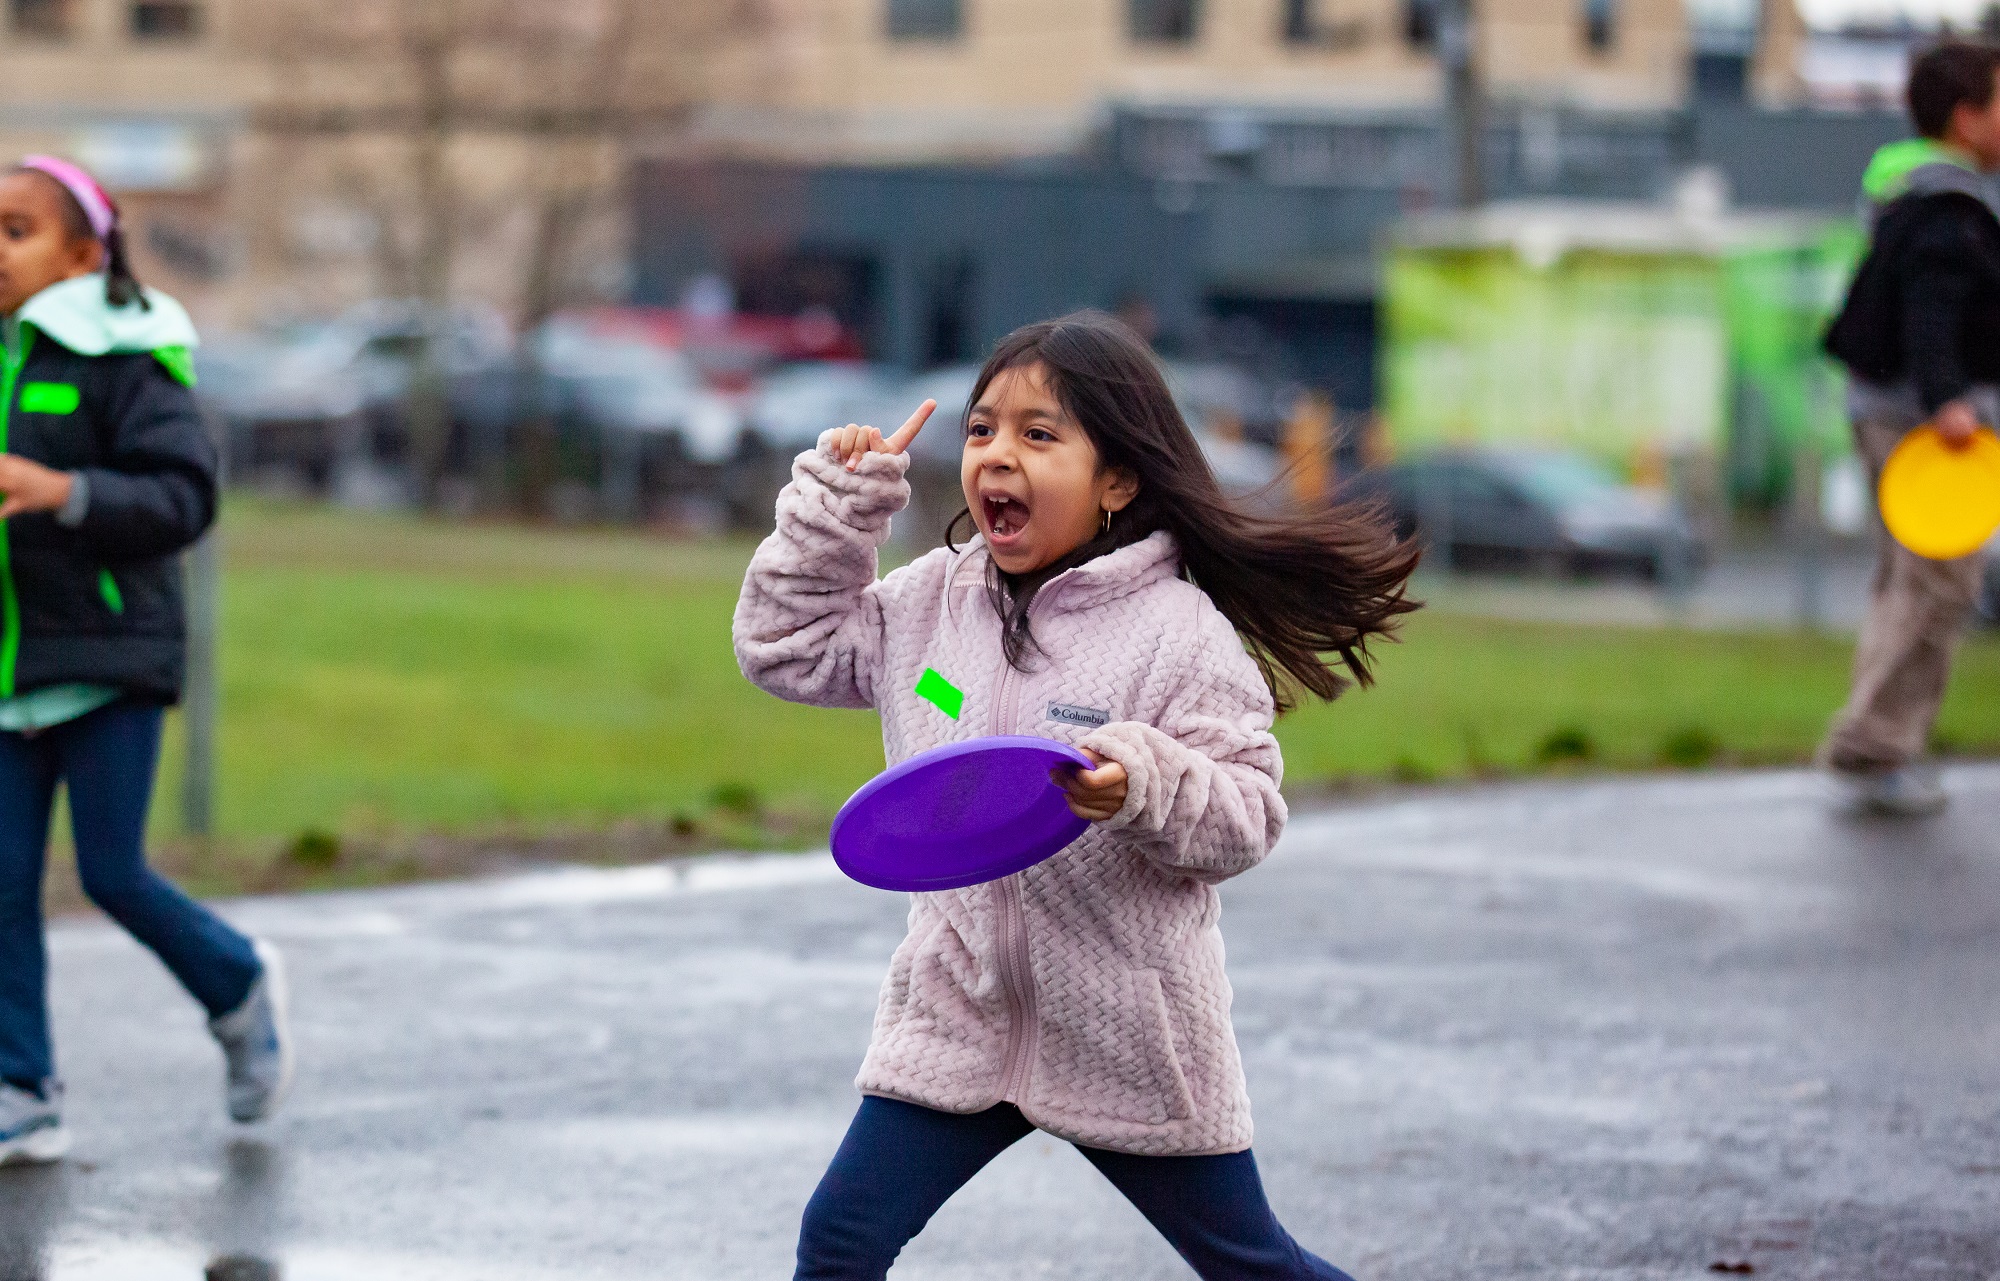 Student plays with frisbee at recess